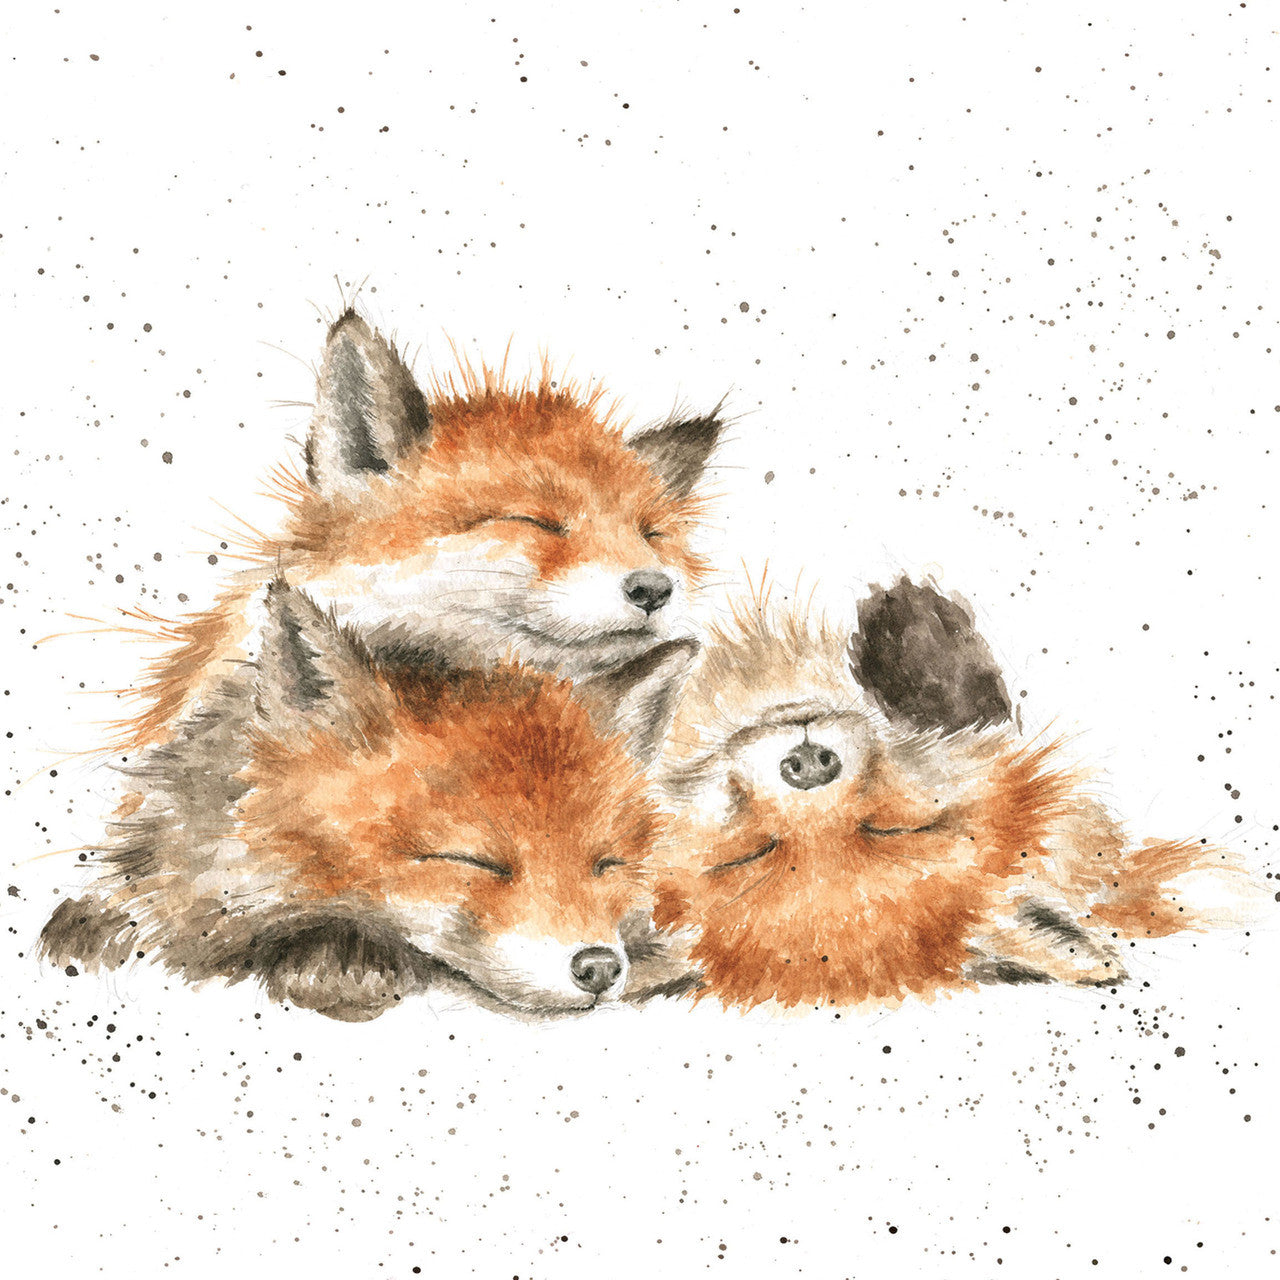 Afternoon Nap by Hannah Dale